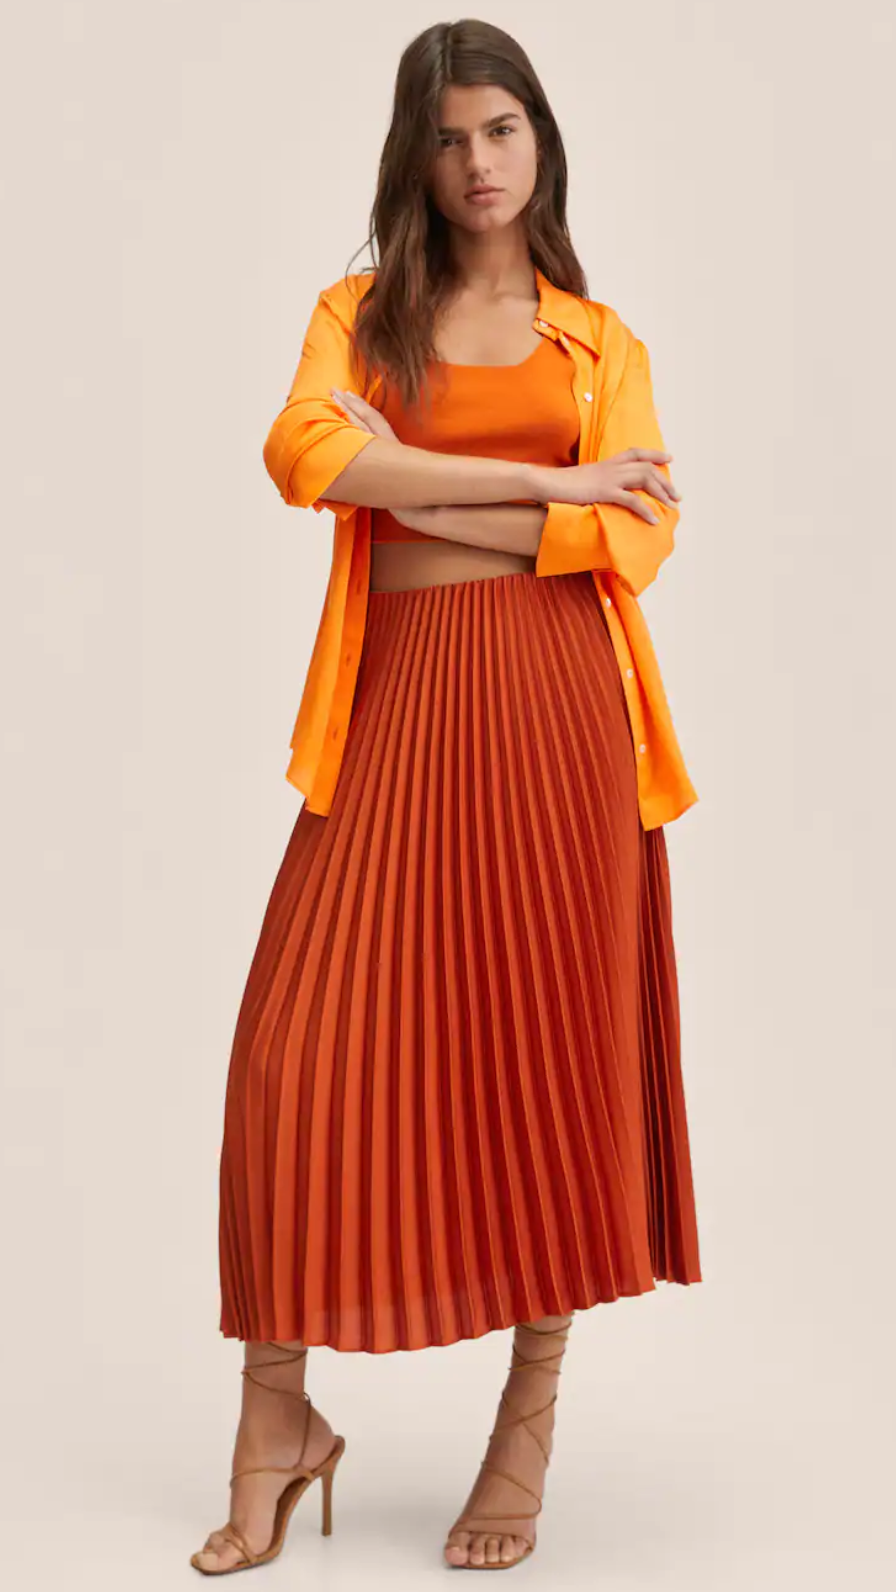 fall must have fashion trends 2022 Pleated midi skirt from Mango